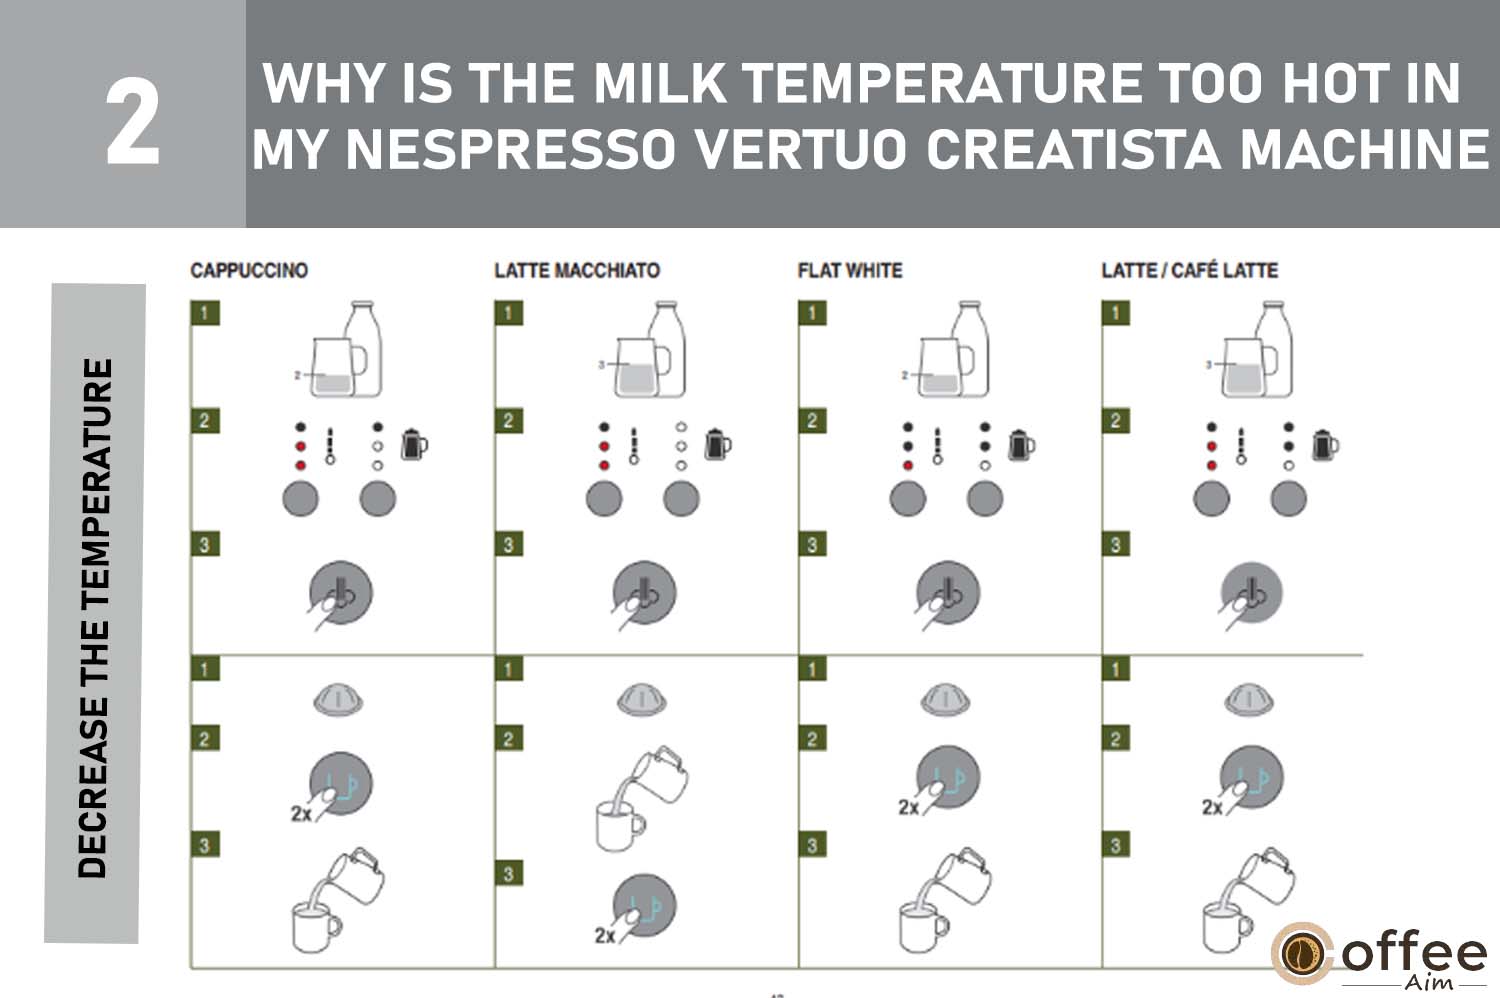 
To cool down hot milk in your Nespresso Vertuo Creatista, lower the temperature. Follow these simple steps in our troubleshooting guide.